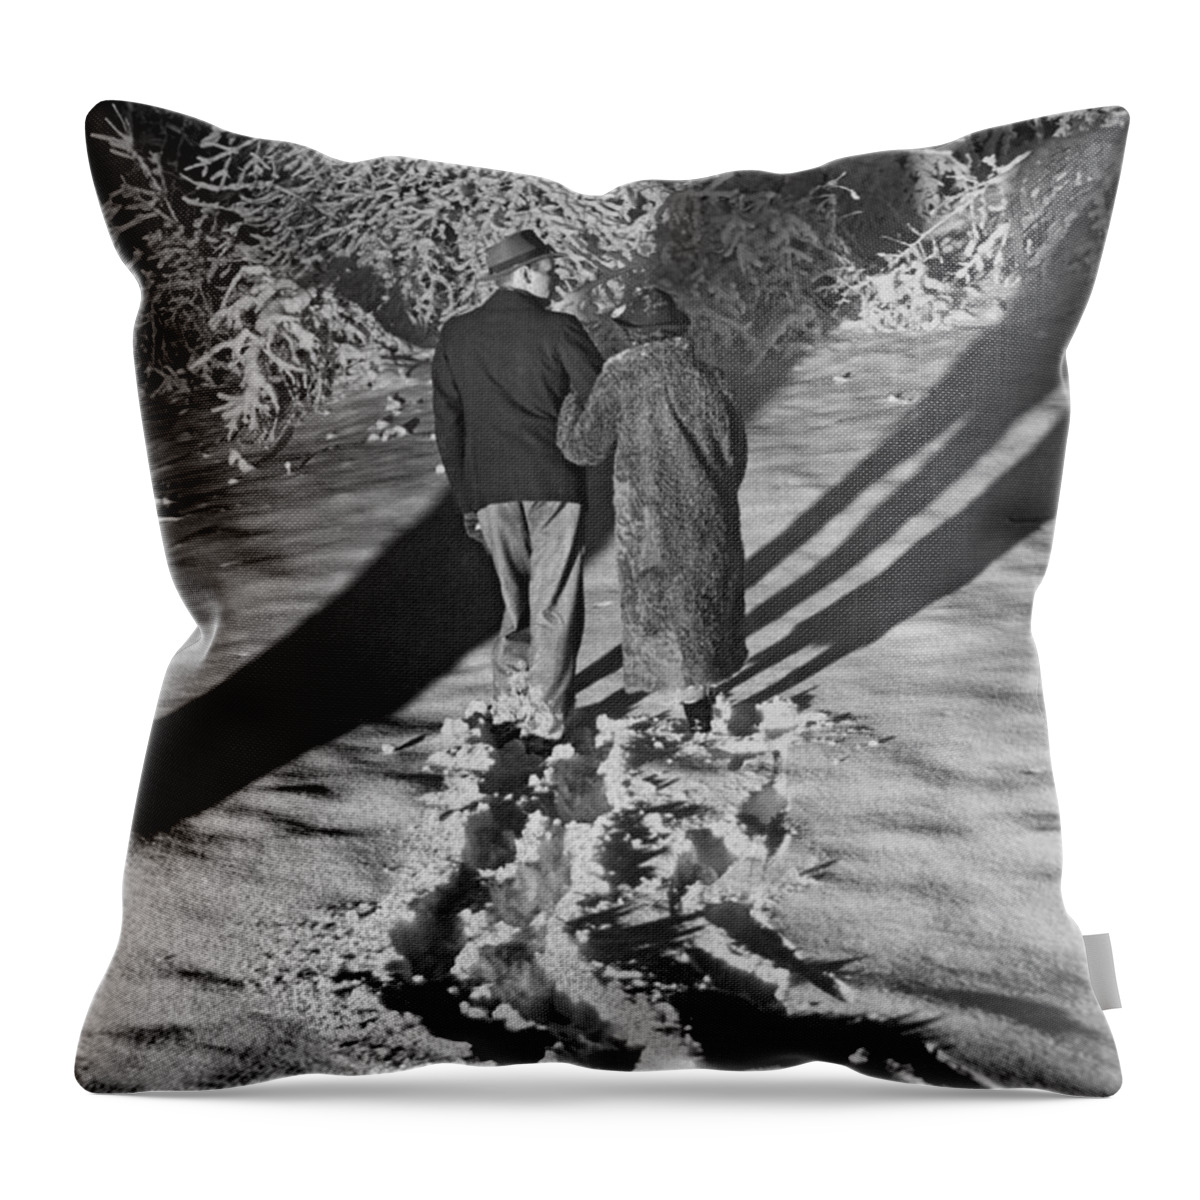 1937 Throw Pillow featuring the photograph Wintertime Moonlight Stroll by Underwood Archives